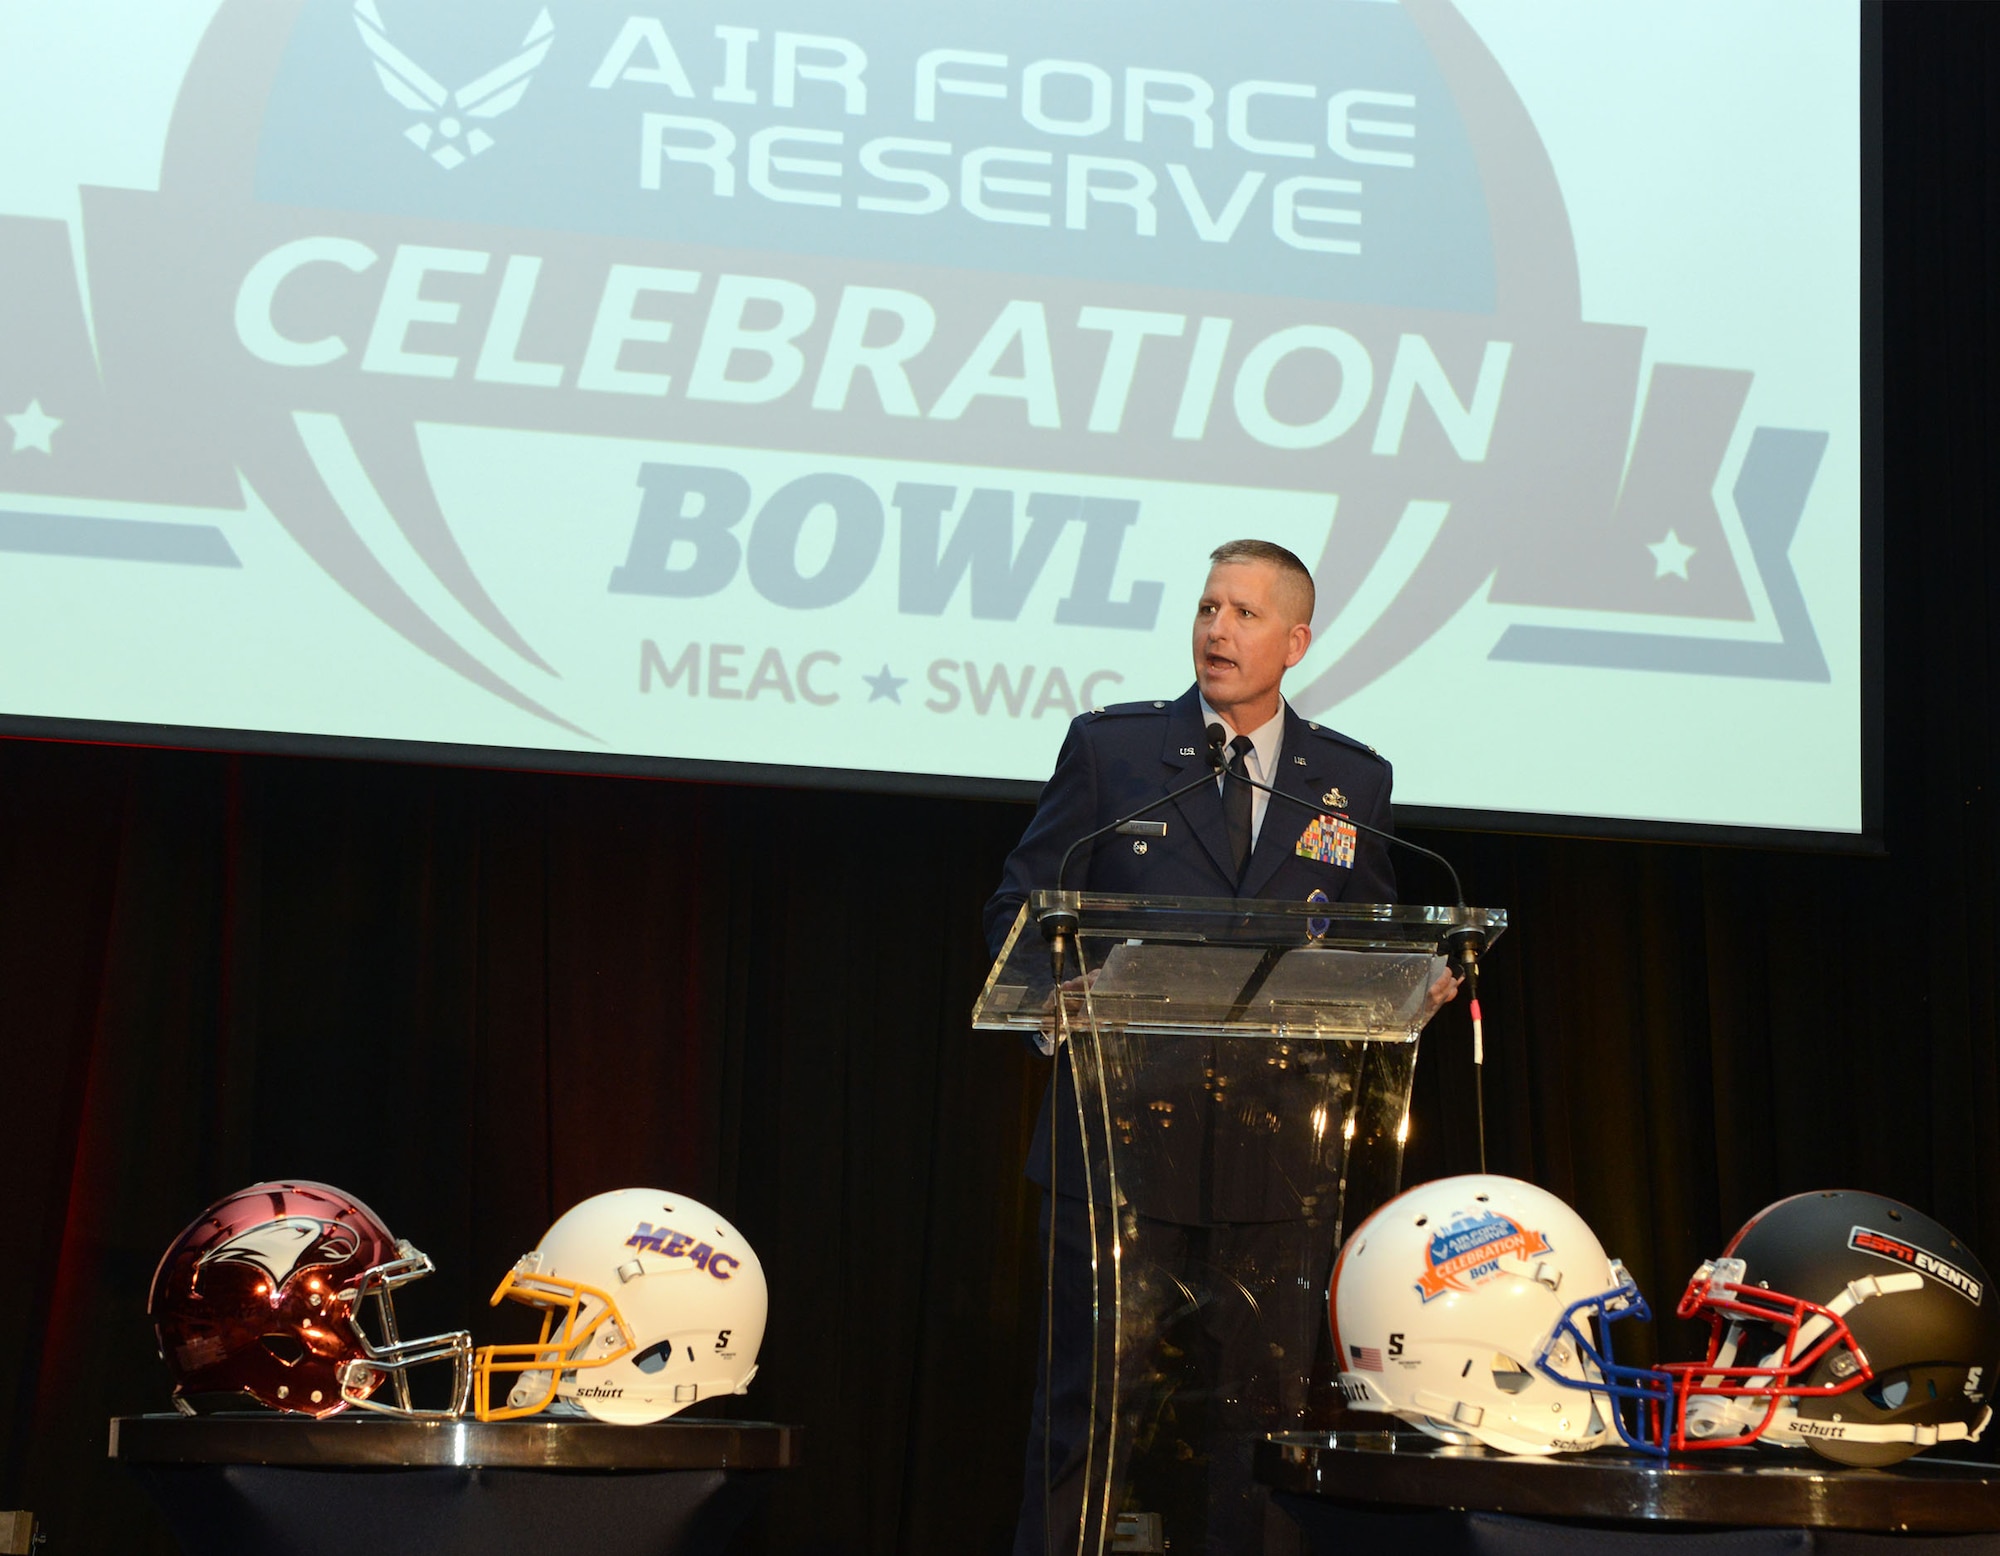 Col. Tim Martz, vice commander,Air Force Reserve Command Recruiting Service, givves a welcome speech to the Grambling State and North Carolina Central football teams at a dinner Wednesday night, welcoming teams to the 2016 Air Force Reseerve Celebration Bowl. Martz compared the Air Force coe values to those of the the teamrs and that each had shared values. He also congratulated the coaches and administrations of each school. He received a large applause when he told the teams that the game would be covered on the Armed Forces Network and told them how important it is to have a taste of home when deployed. The game kicks off at noon at the Gerogia Dome in Atlanta and will be aired on ABC. (Air Force photo/Master Sgt. Chance Babin)